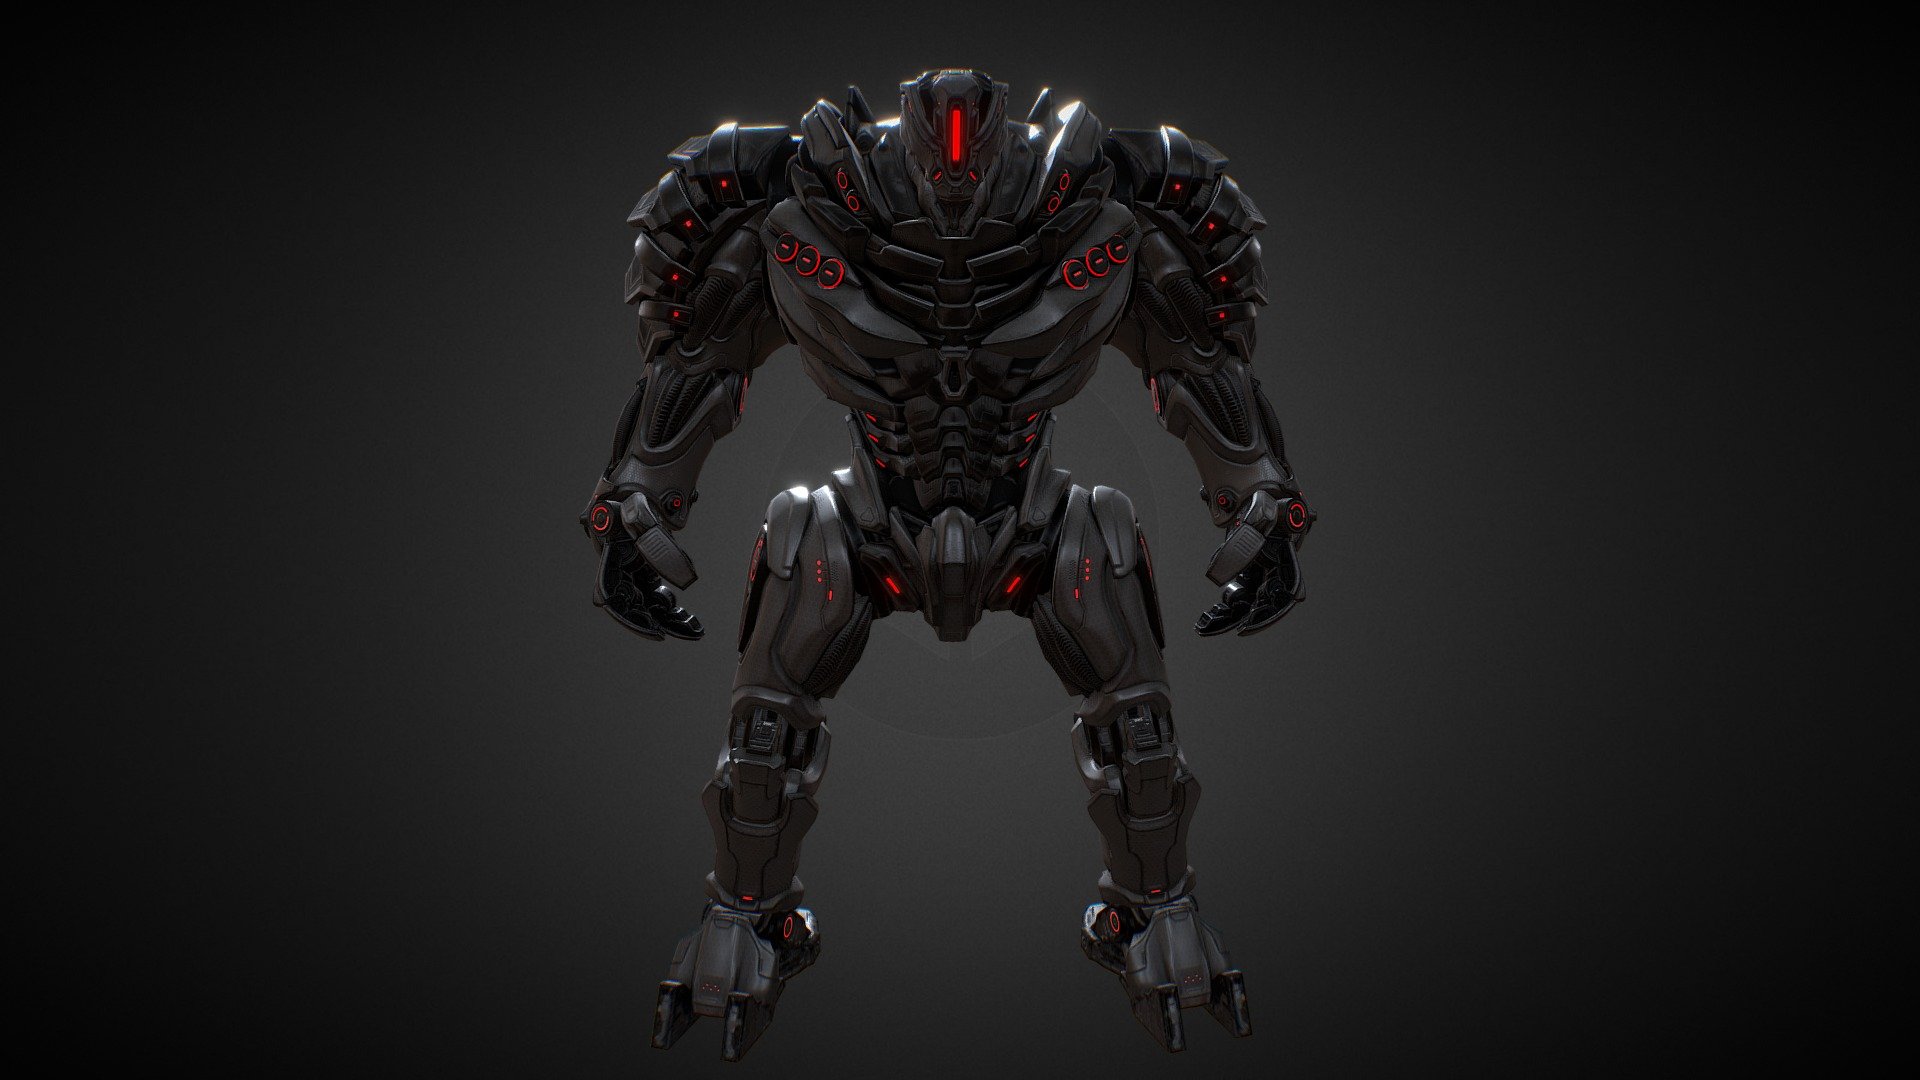 HUMNX AI and simulated modeling centered around local maxima designs, with all predicted outcomes favoring only slight changes to established mech configurations. But the USFF discovery of Line Bonded Molecular Structure, swiftly stolen, provided new direction, ultimately leading to the development of the most powerful HUMNX mech, the HX Behemoth.

HP  450
Max Speed   128 Mph
Weight  200 Tons
Weapon (Left)   Thrasher AMG Machinegun Mk II, SlamshotHeavy Rocket
Weapon (Right)  Thrasher AMG Machinegun Mk II, Brimstone Cannon

https://archangelgame.com/mech/humnx-heavy - Humnx Obsidian Behemoth - 3D model by Archangel: Hellfire (@archangelgame) 3d model